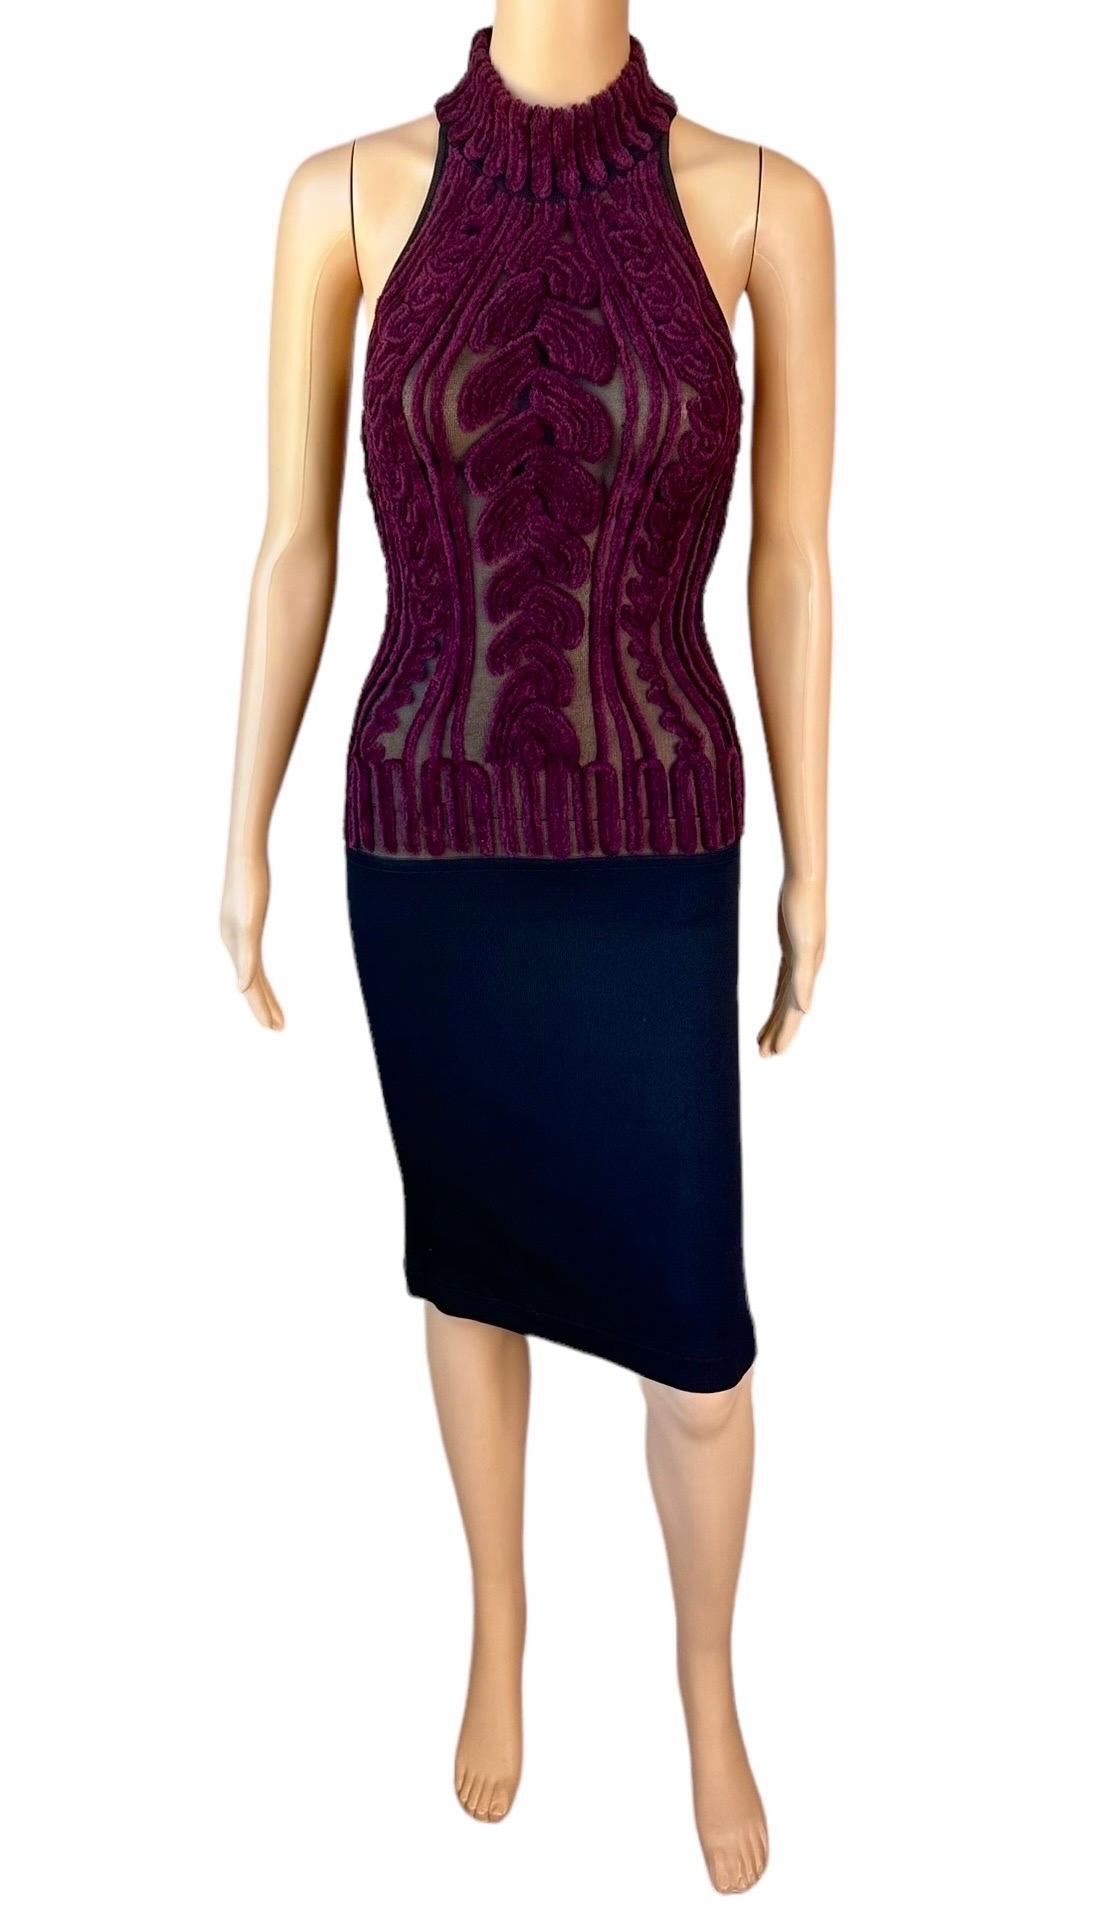 Thierry Mugler 1990's Vintage Semi-Sheer Devoré Faux Chenille Cable Knit Dress  In Good Condition For Sale In Naples, FL